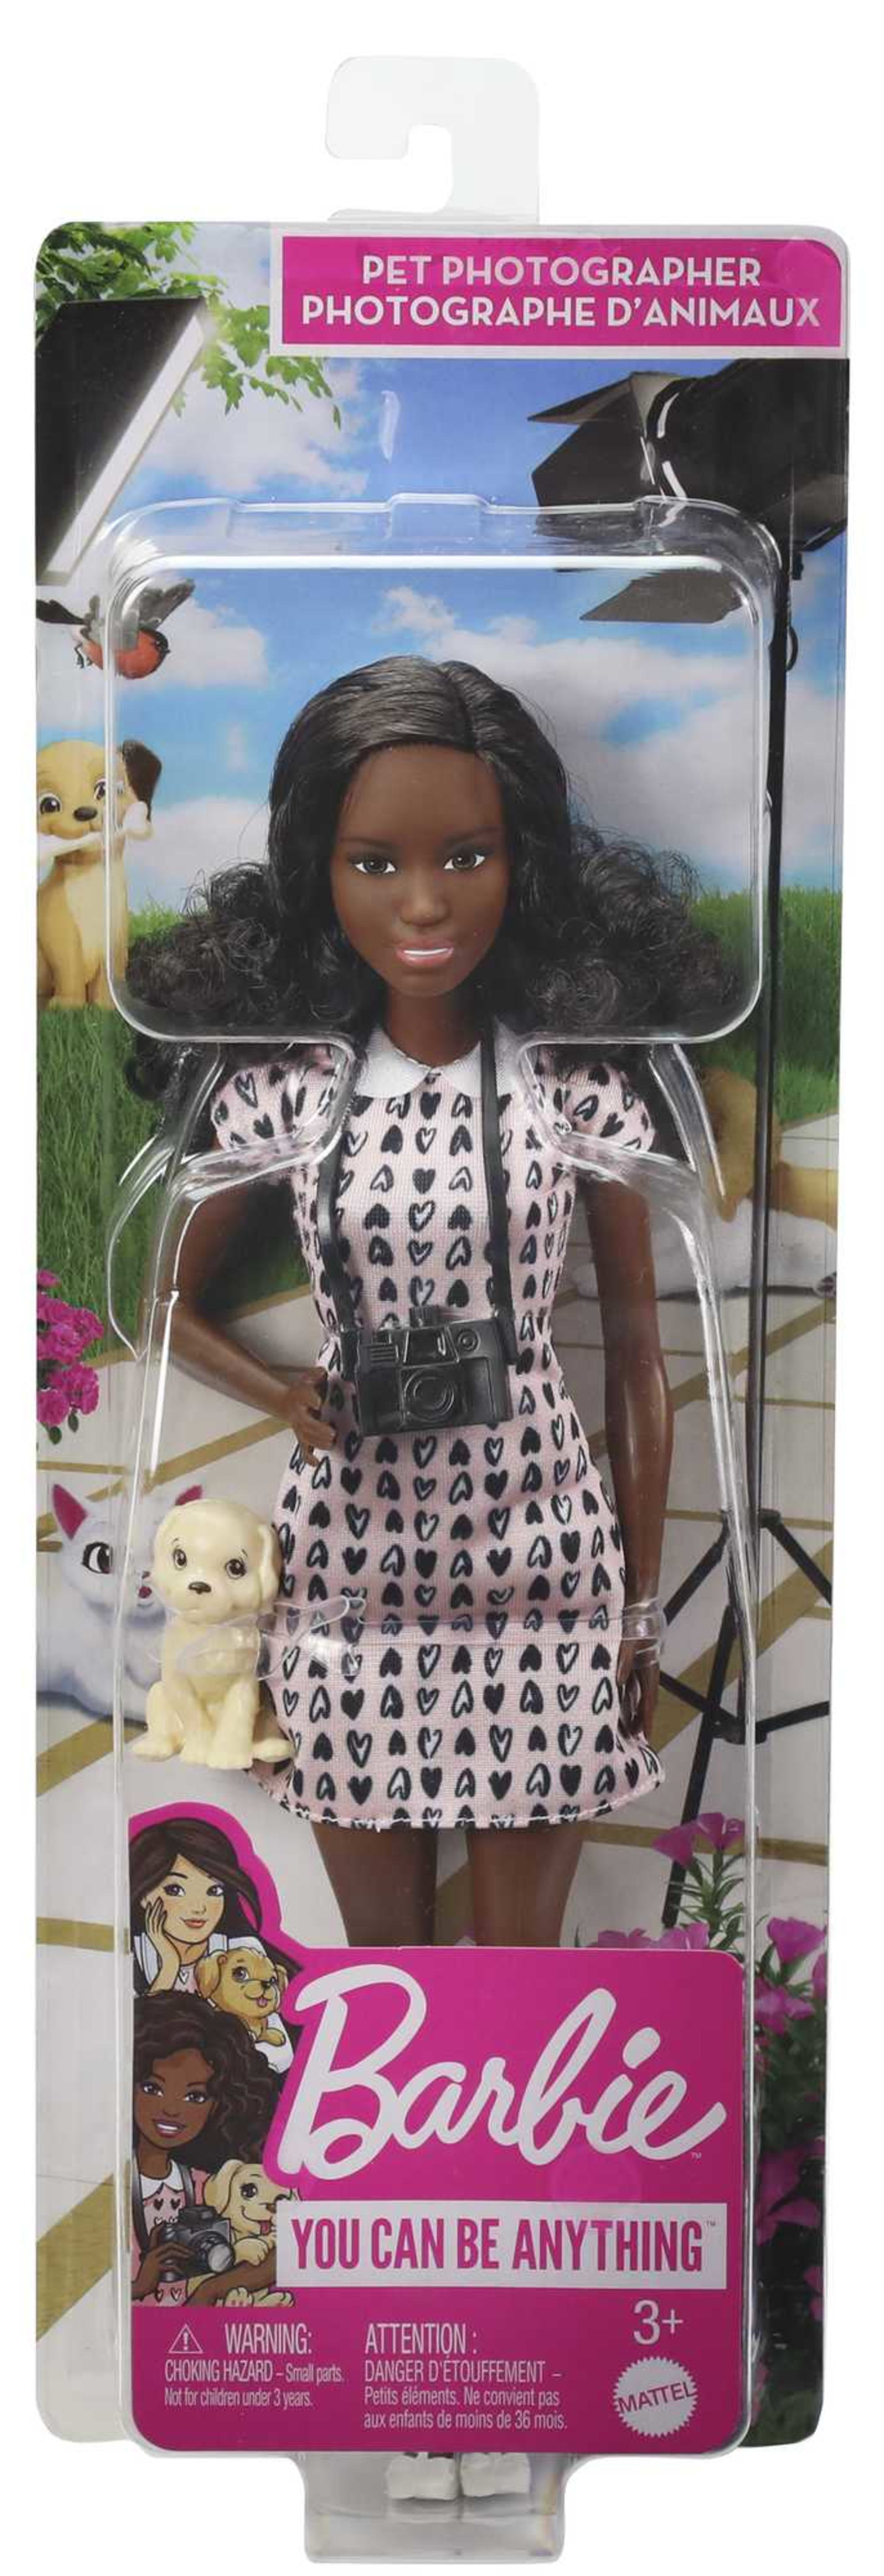 Barbie 12 Inch Photographer Petite Brunette Doll with Camera Accessory for Ages 3+